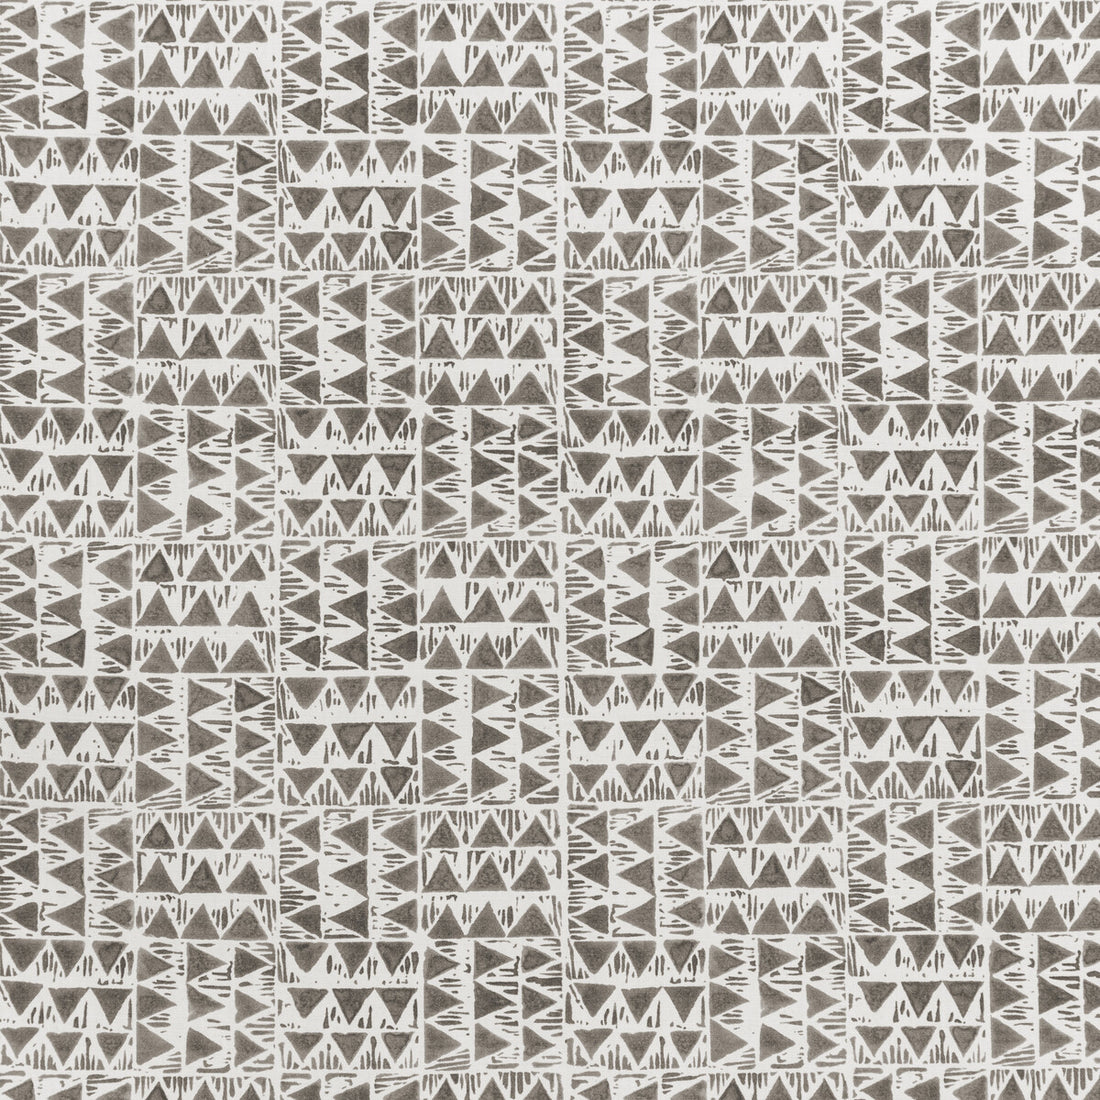 Yampa Print fabric in grey color - pattern 2020210.11.0 - by Lee Jofa in the Breckenridge collection